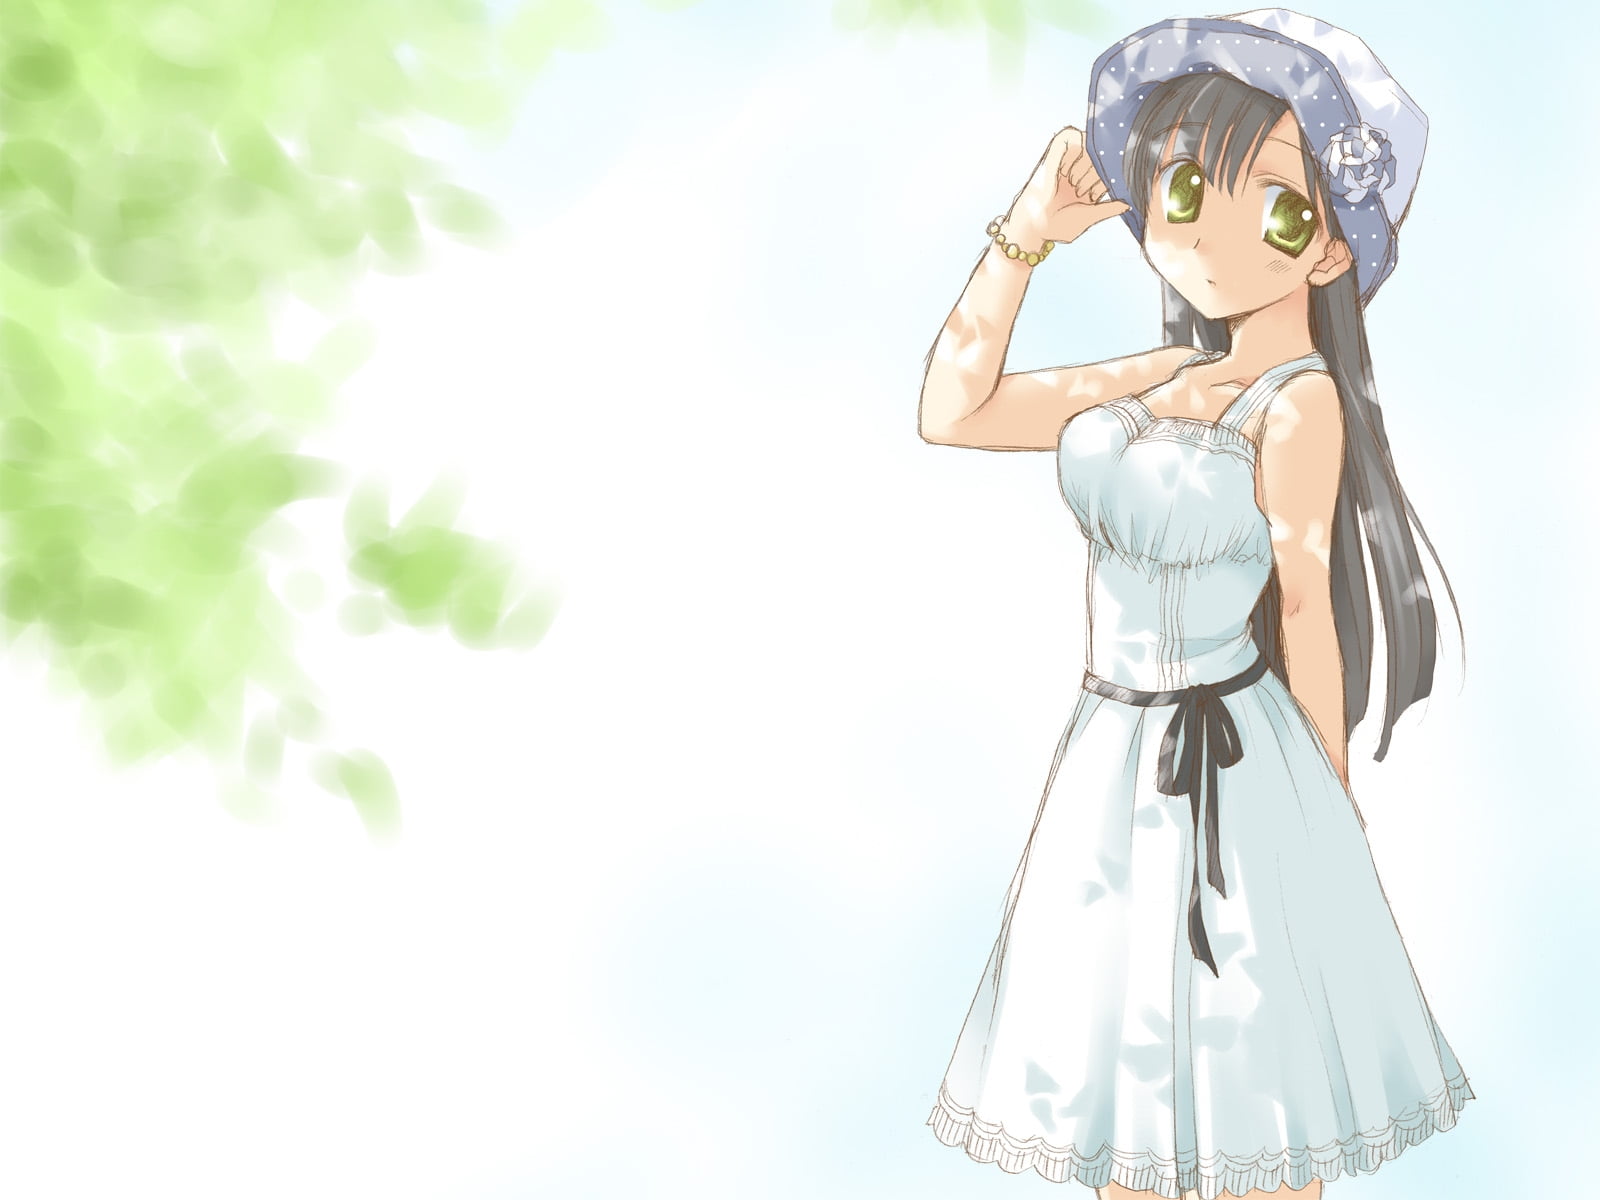 Female Anime Character With White Tank Dress And Blue Bucket Hat Digital Wallpaper Hd Wallpaper Wallpaper Flare Collection by no • last updated 3 weeks ago. female anime character with white tank